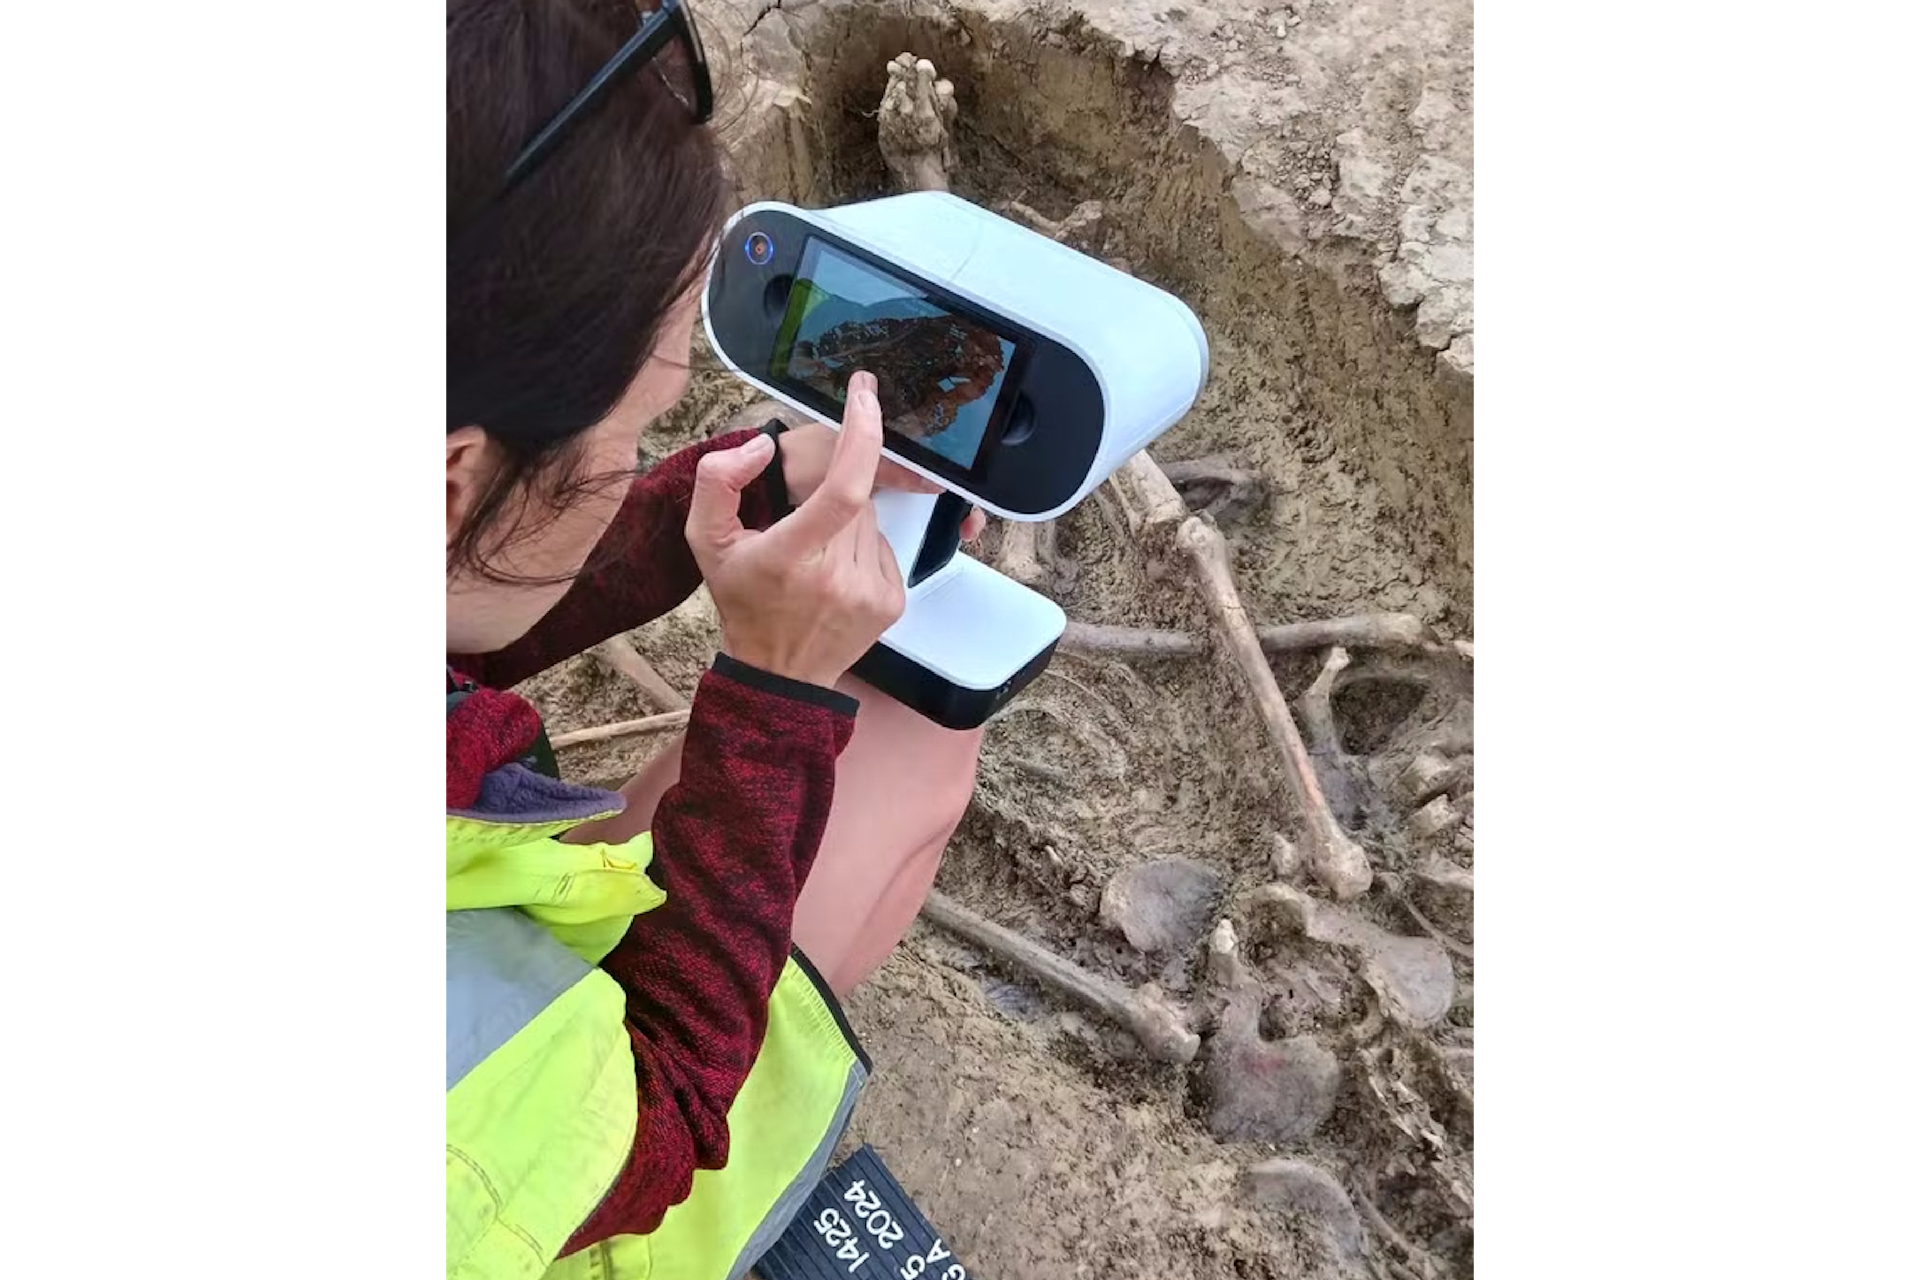 Scientists will continue to analyze the site to learn more about the people who were buried there roughly 6,000 years ago.